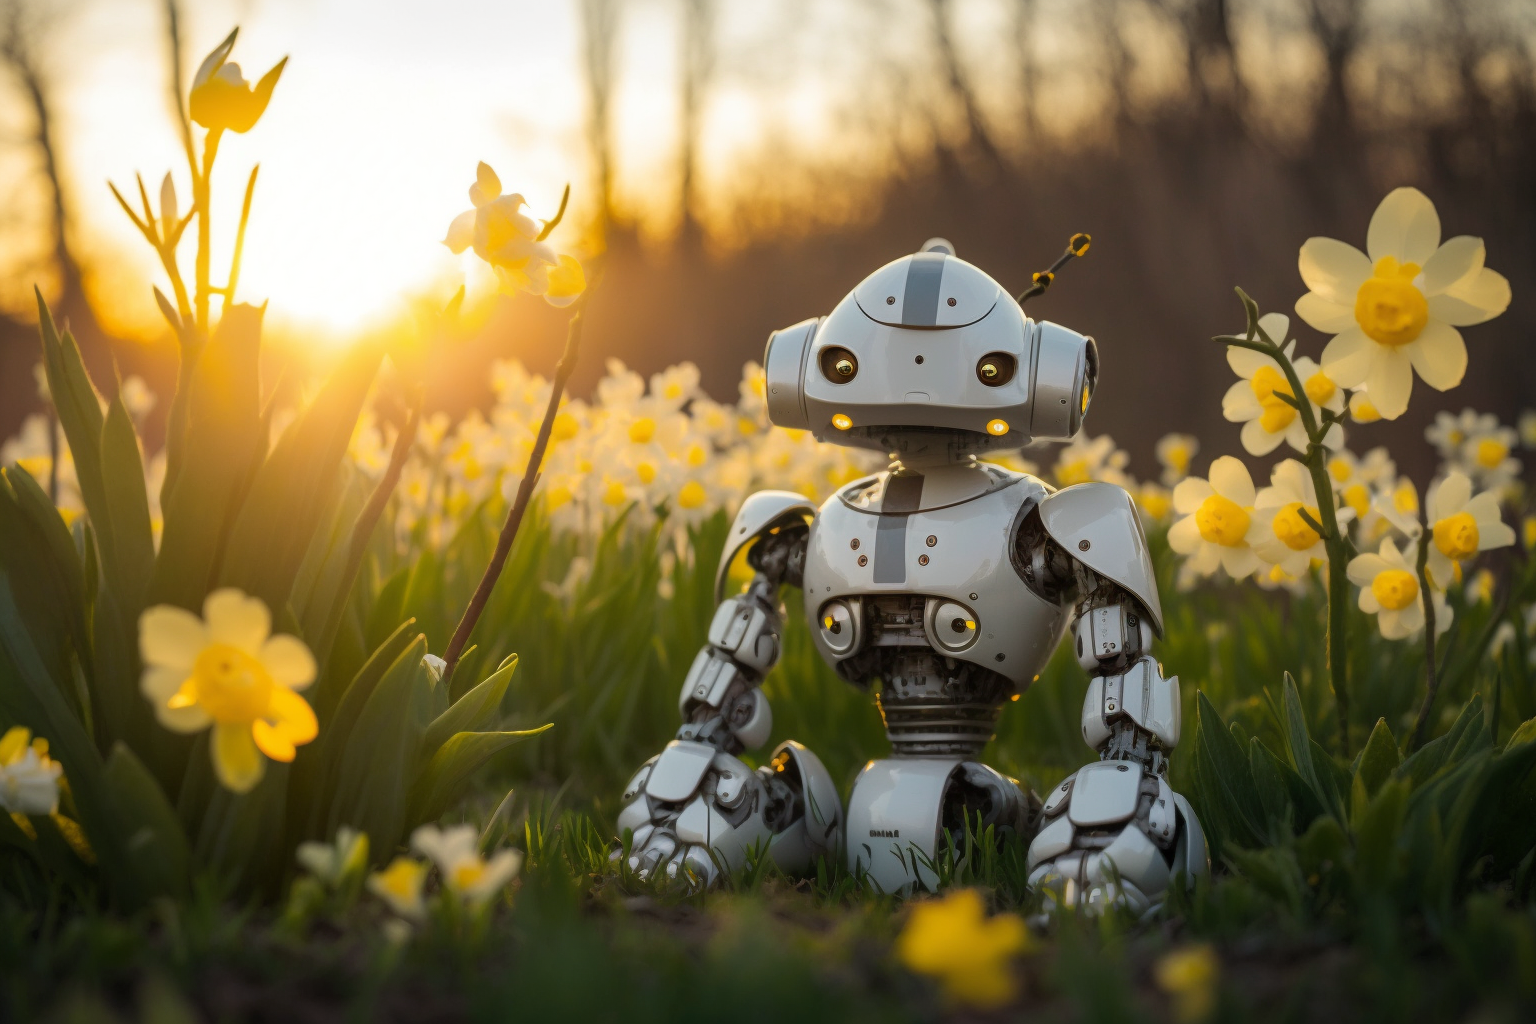 AI Robot in a Meadow with Daffodils